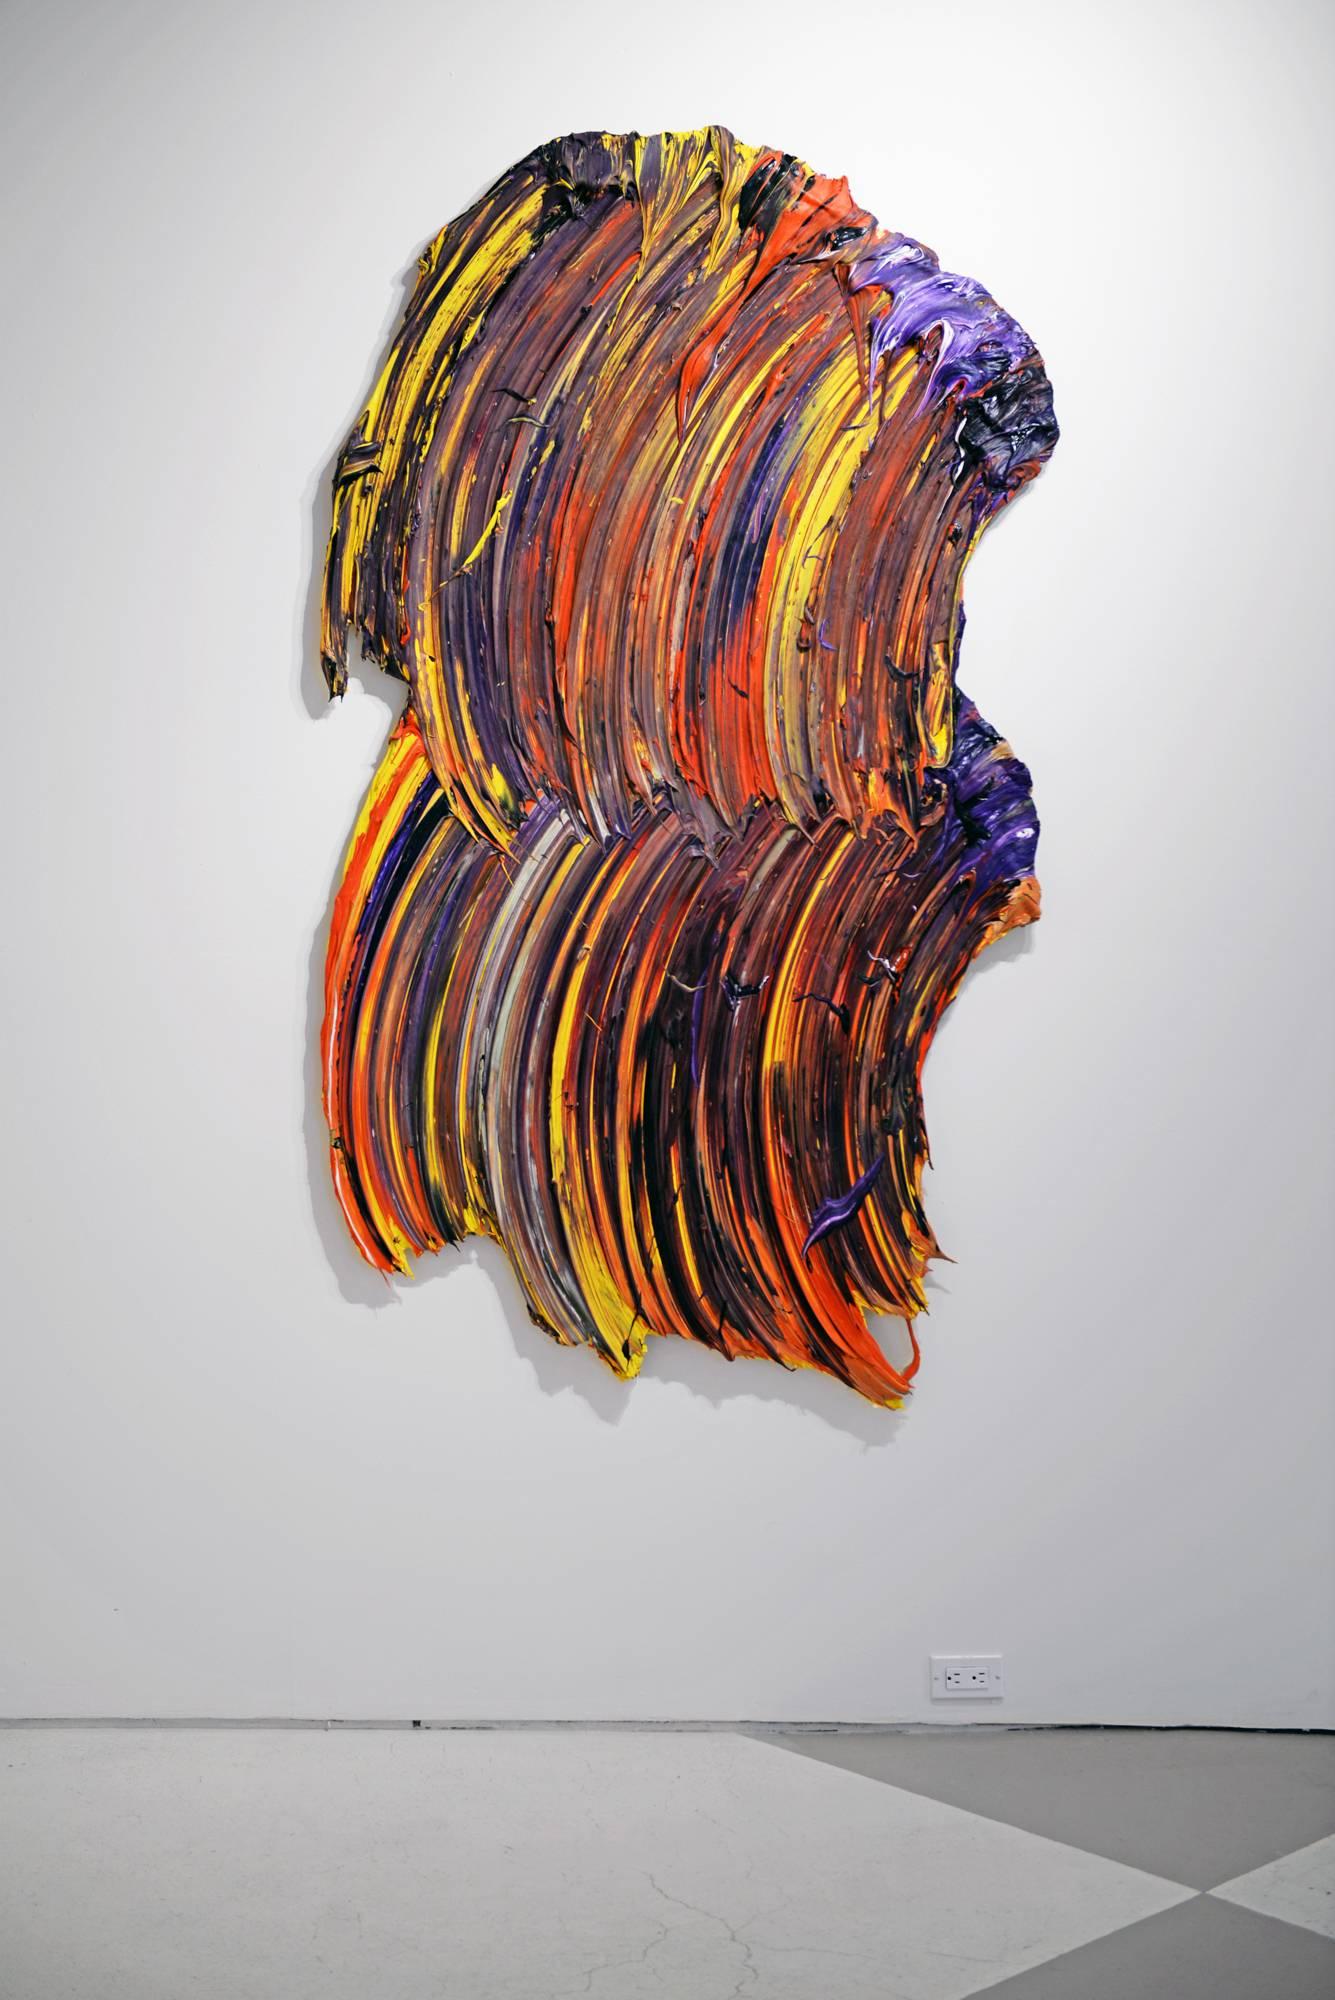 Donald Martiny is interested in allowing gesture to escape from the traditional rectangular support and realize its potential in relation to architectural space. Each piece encourages a dialogue between the viewer, the work, and the space contained